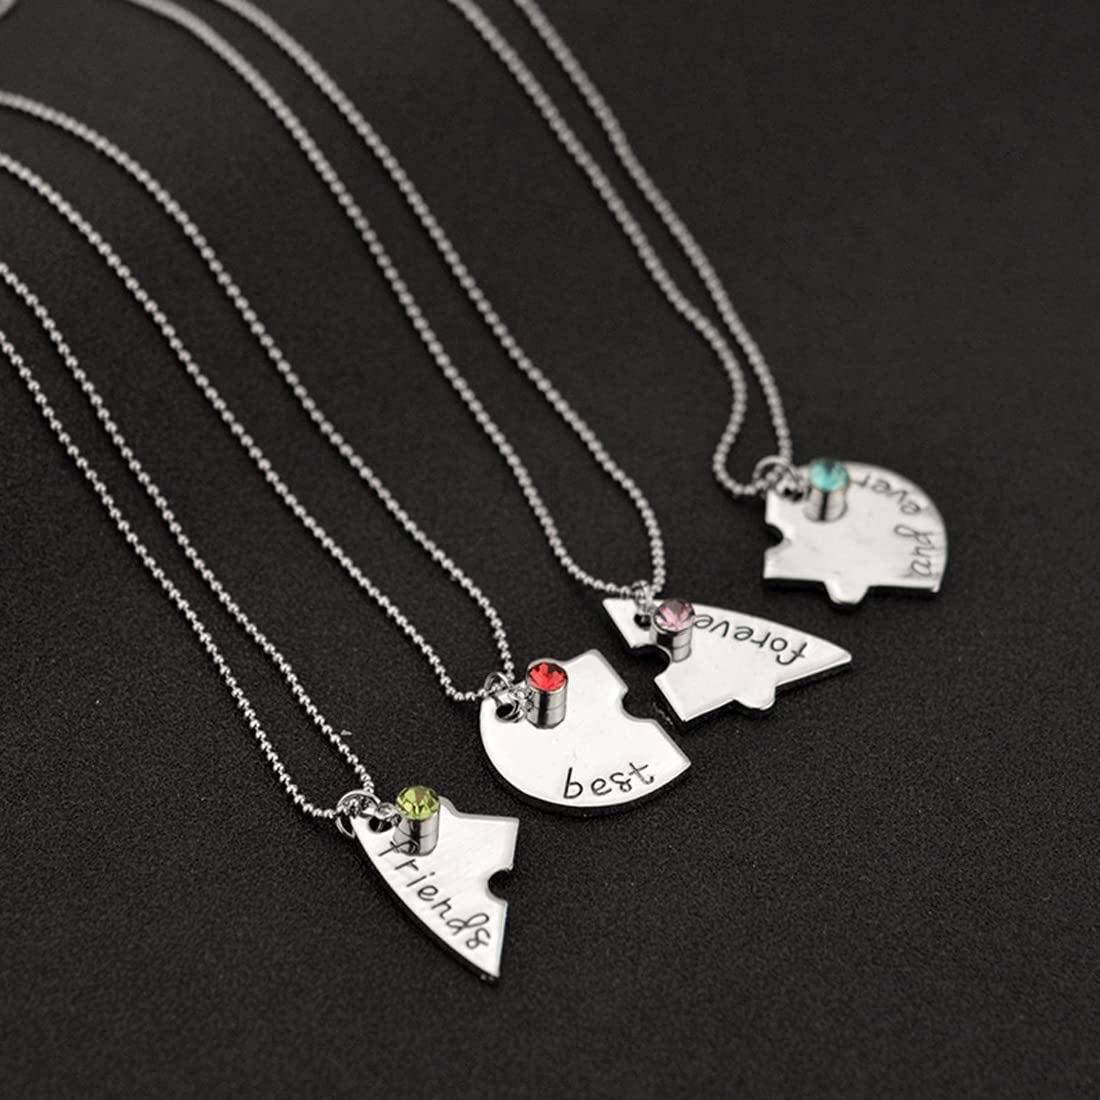 Three Sets Of Good Friends Series Letters Best Friends Forever Heart-shaped Pendant  Necklace Girlfriends Exclusive - Necklace - AliExpress